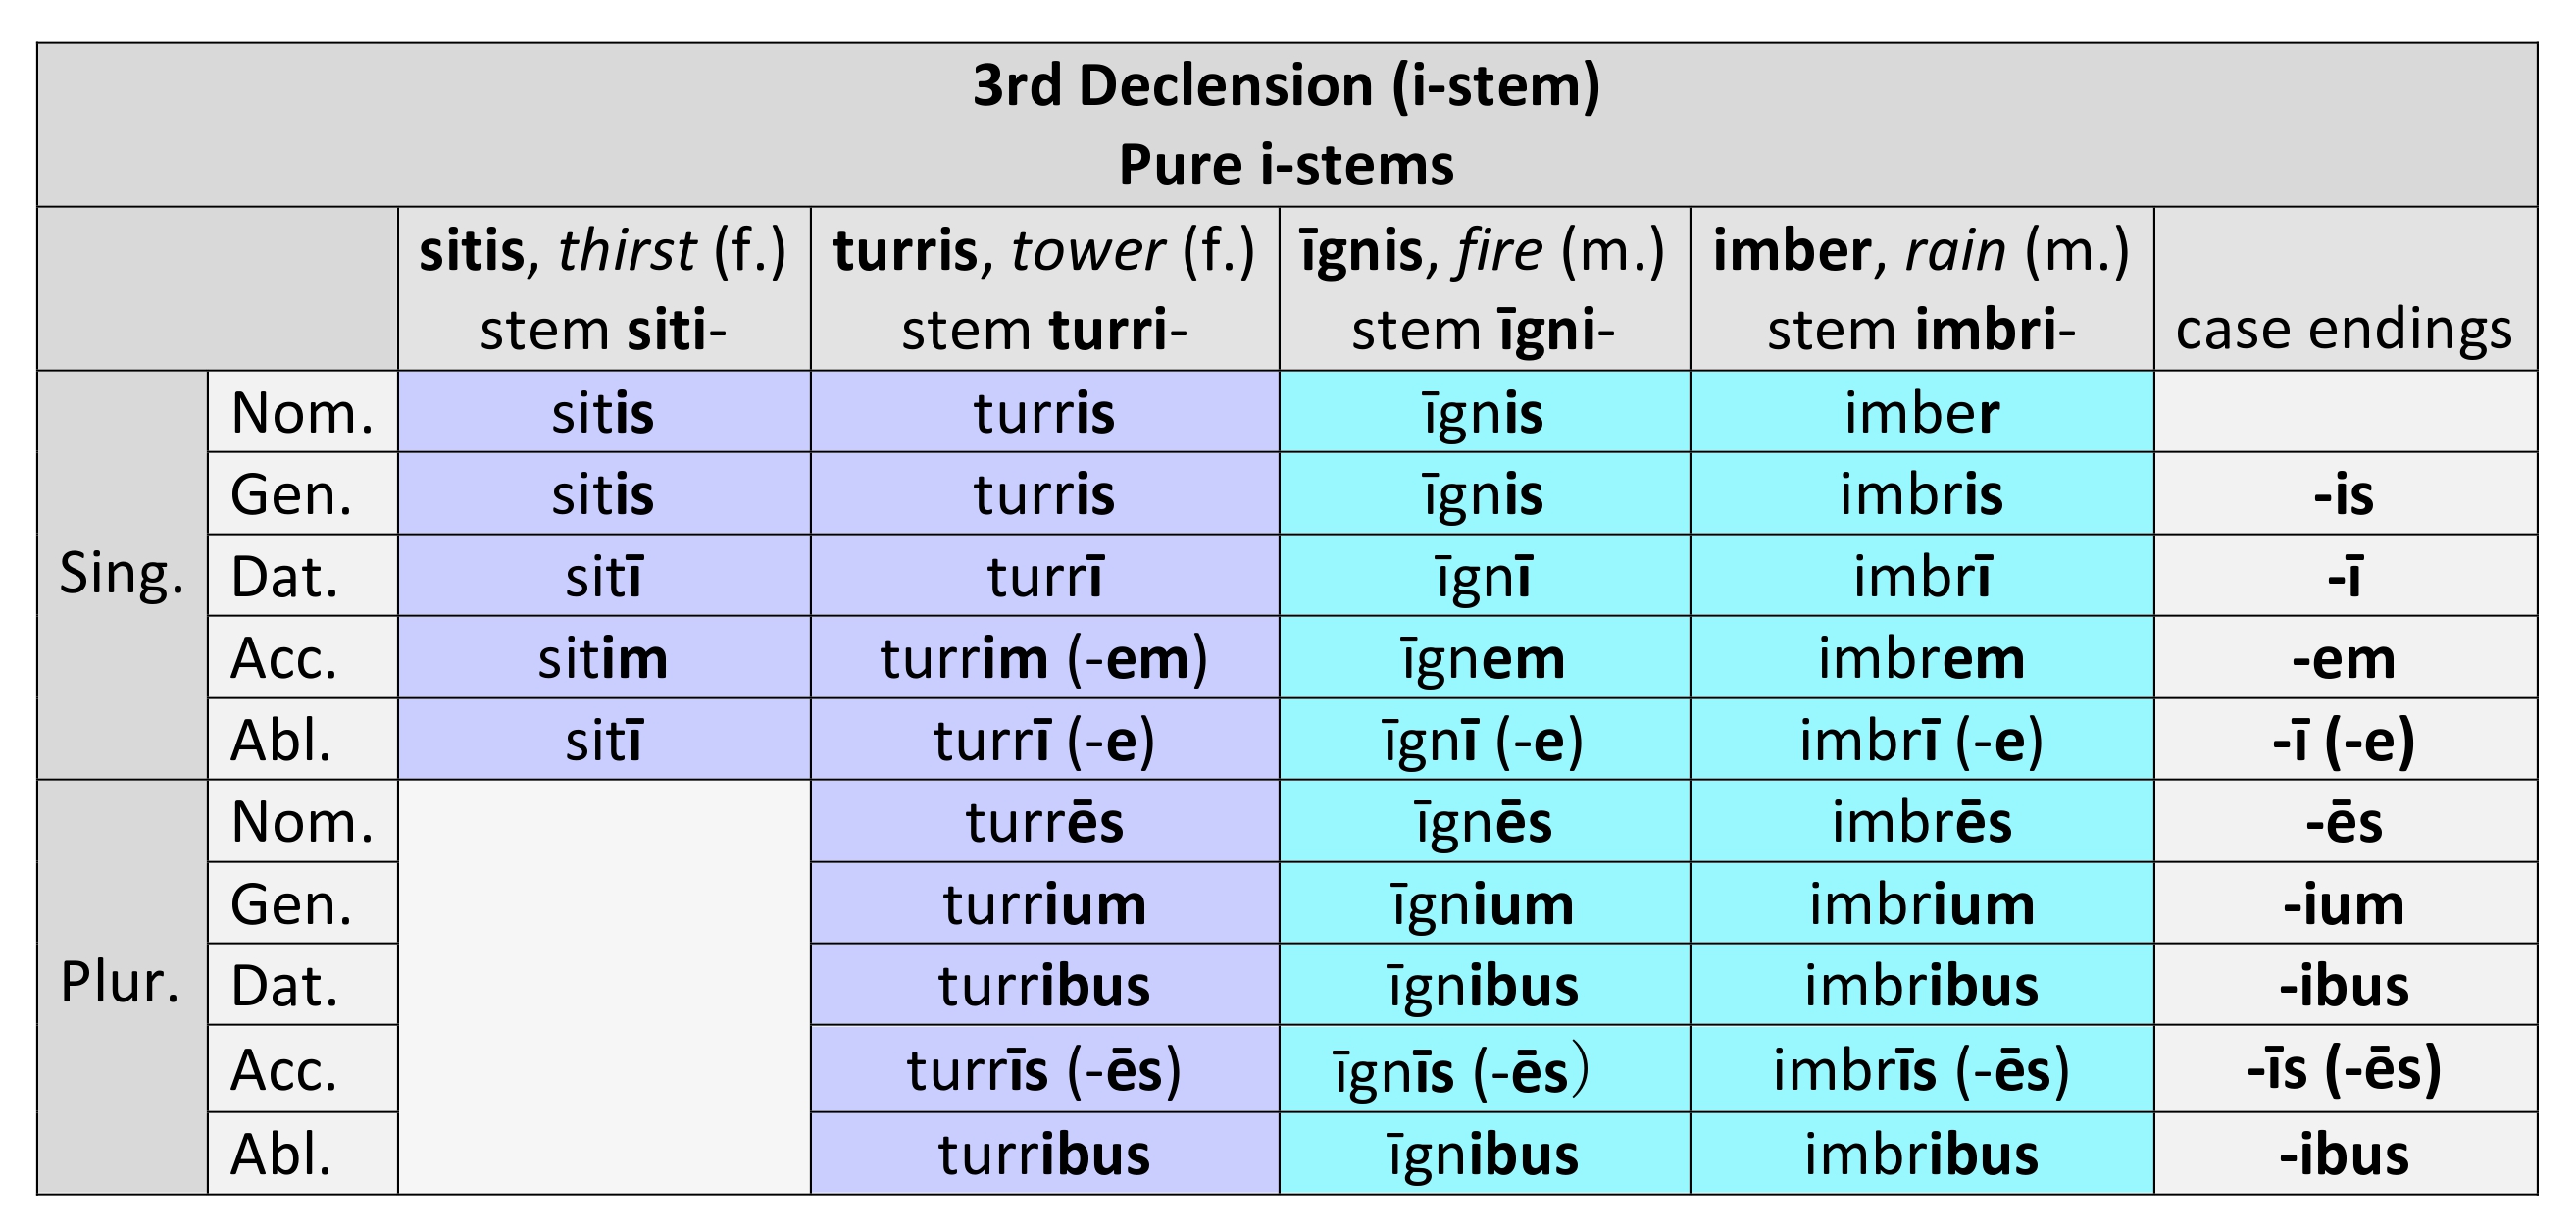 Paradigm for 3rd declension masculine and feminine pure i-stem nouns